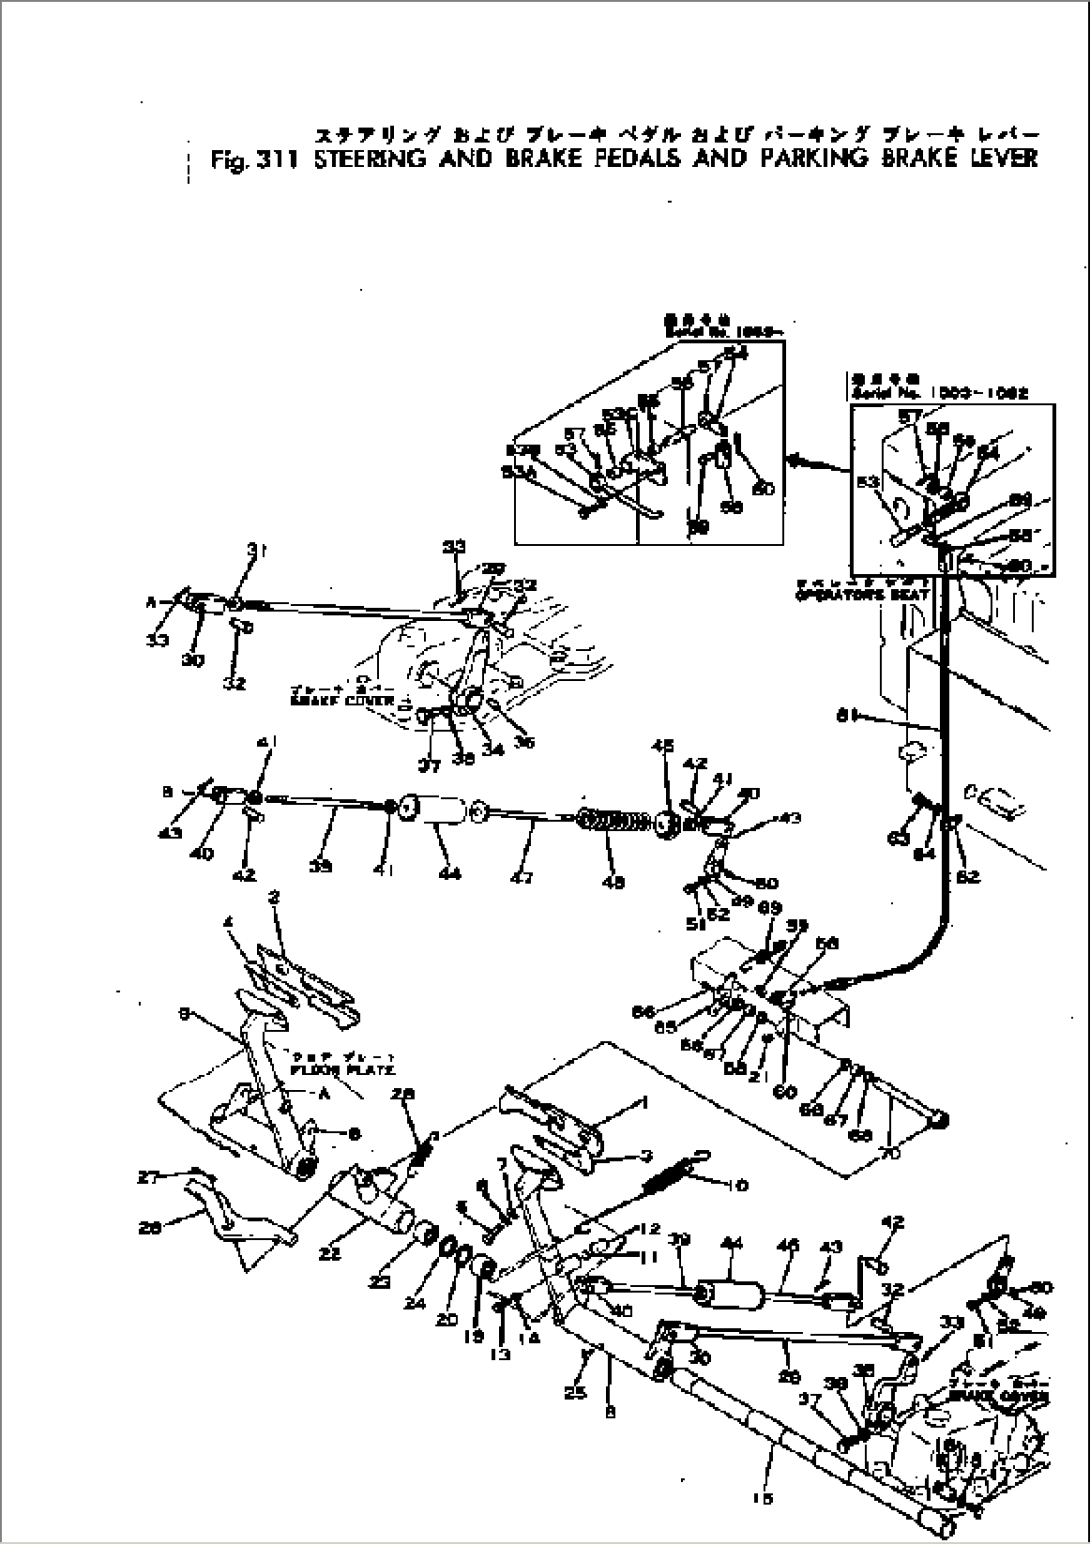 STEERING AND BRAKE PEDALS AND PARKING BRAKE LEVER